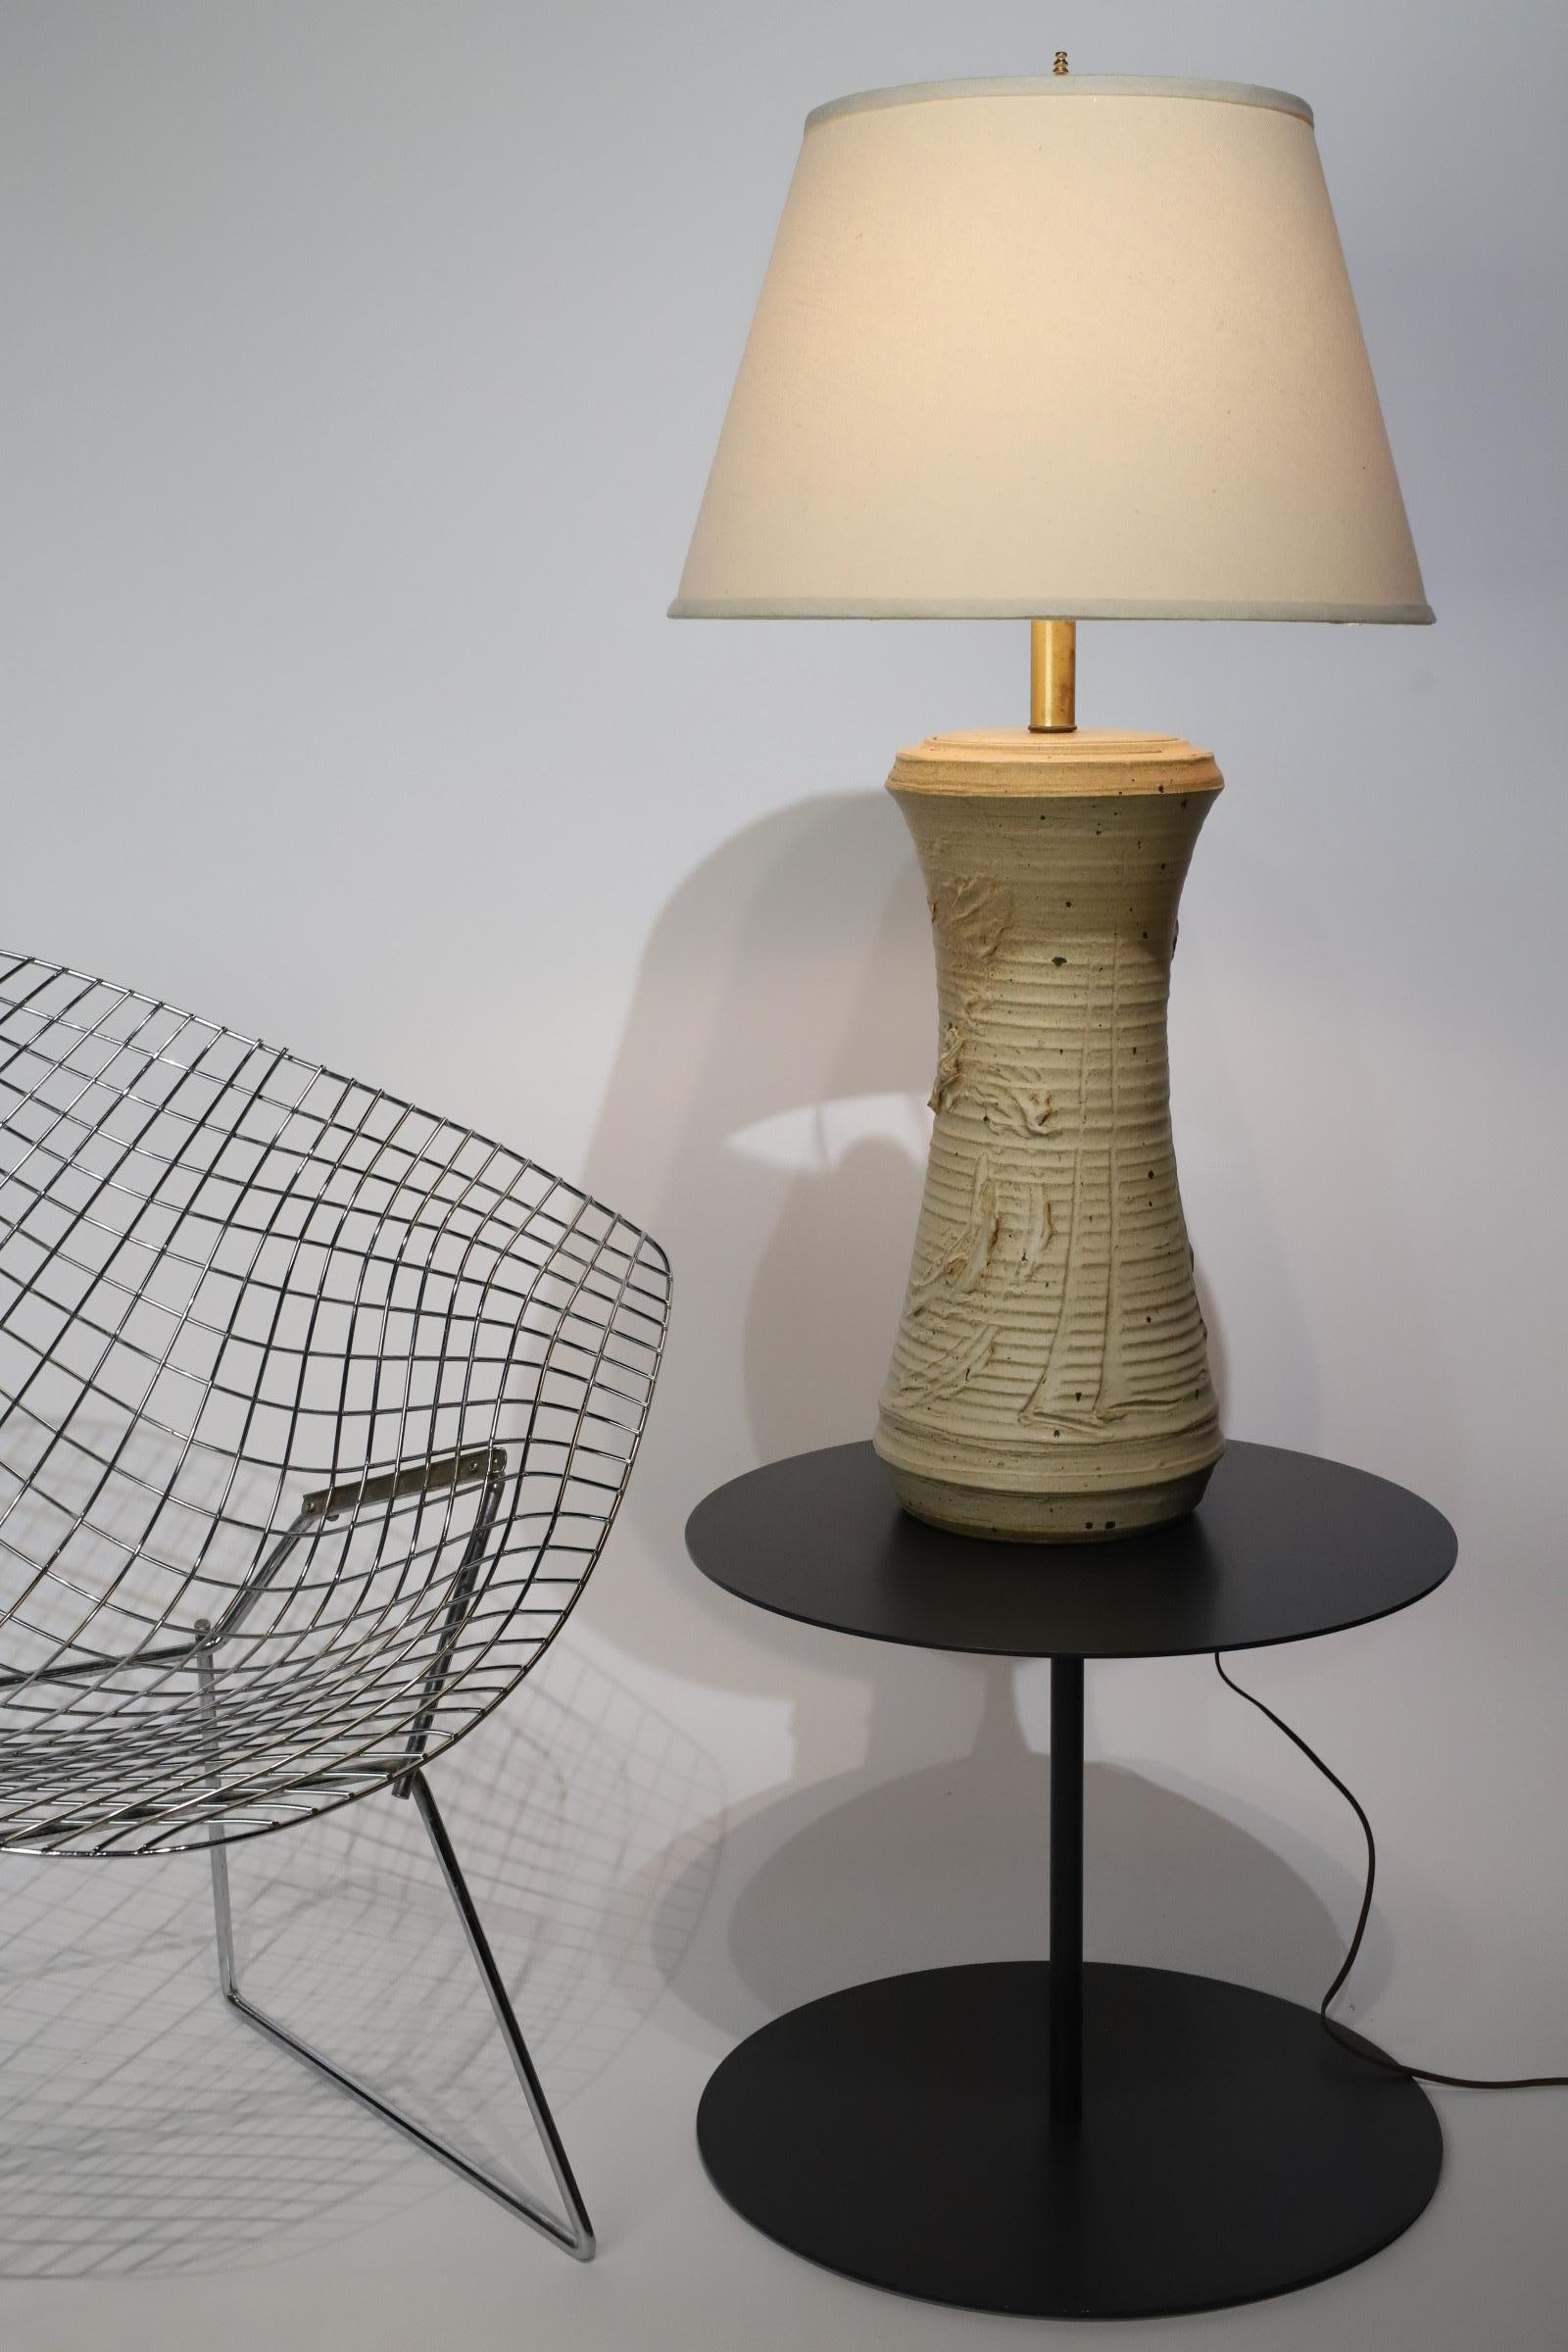 A captivating Ceramic Table Lamp, exquisitely designed by the talented artist Bob Kinzie for Affiliated Craftsmen. This remarkable lamp is a true testament to Kinzie's skillful craftsmanship and artistic vision, offering a stunning blend of